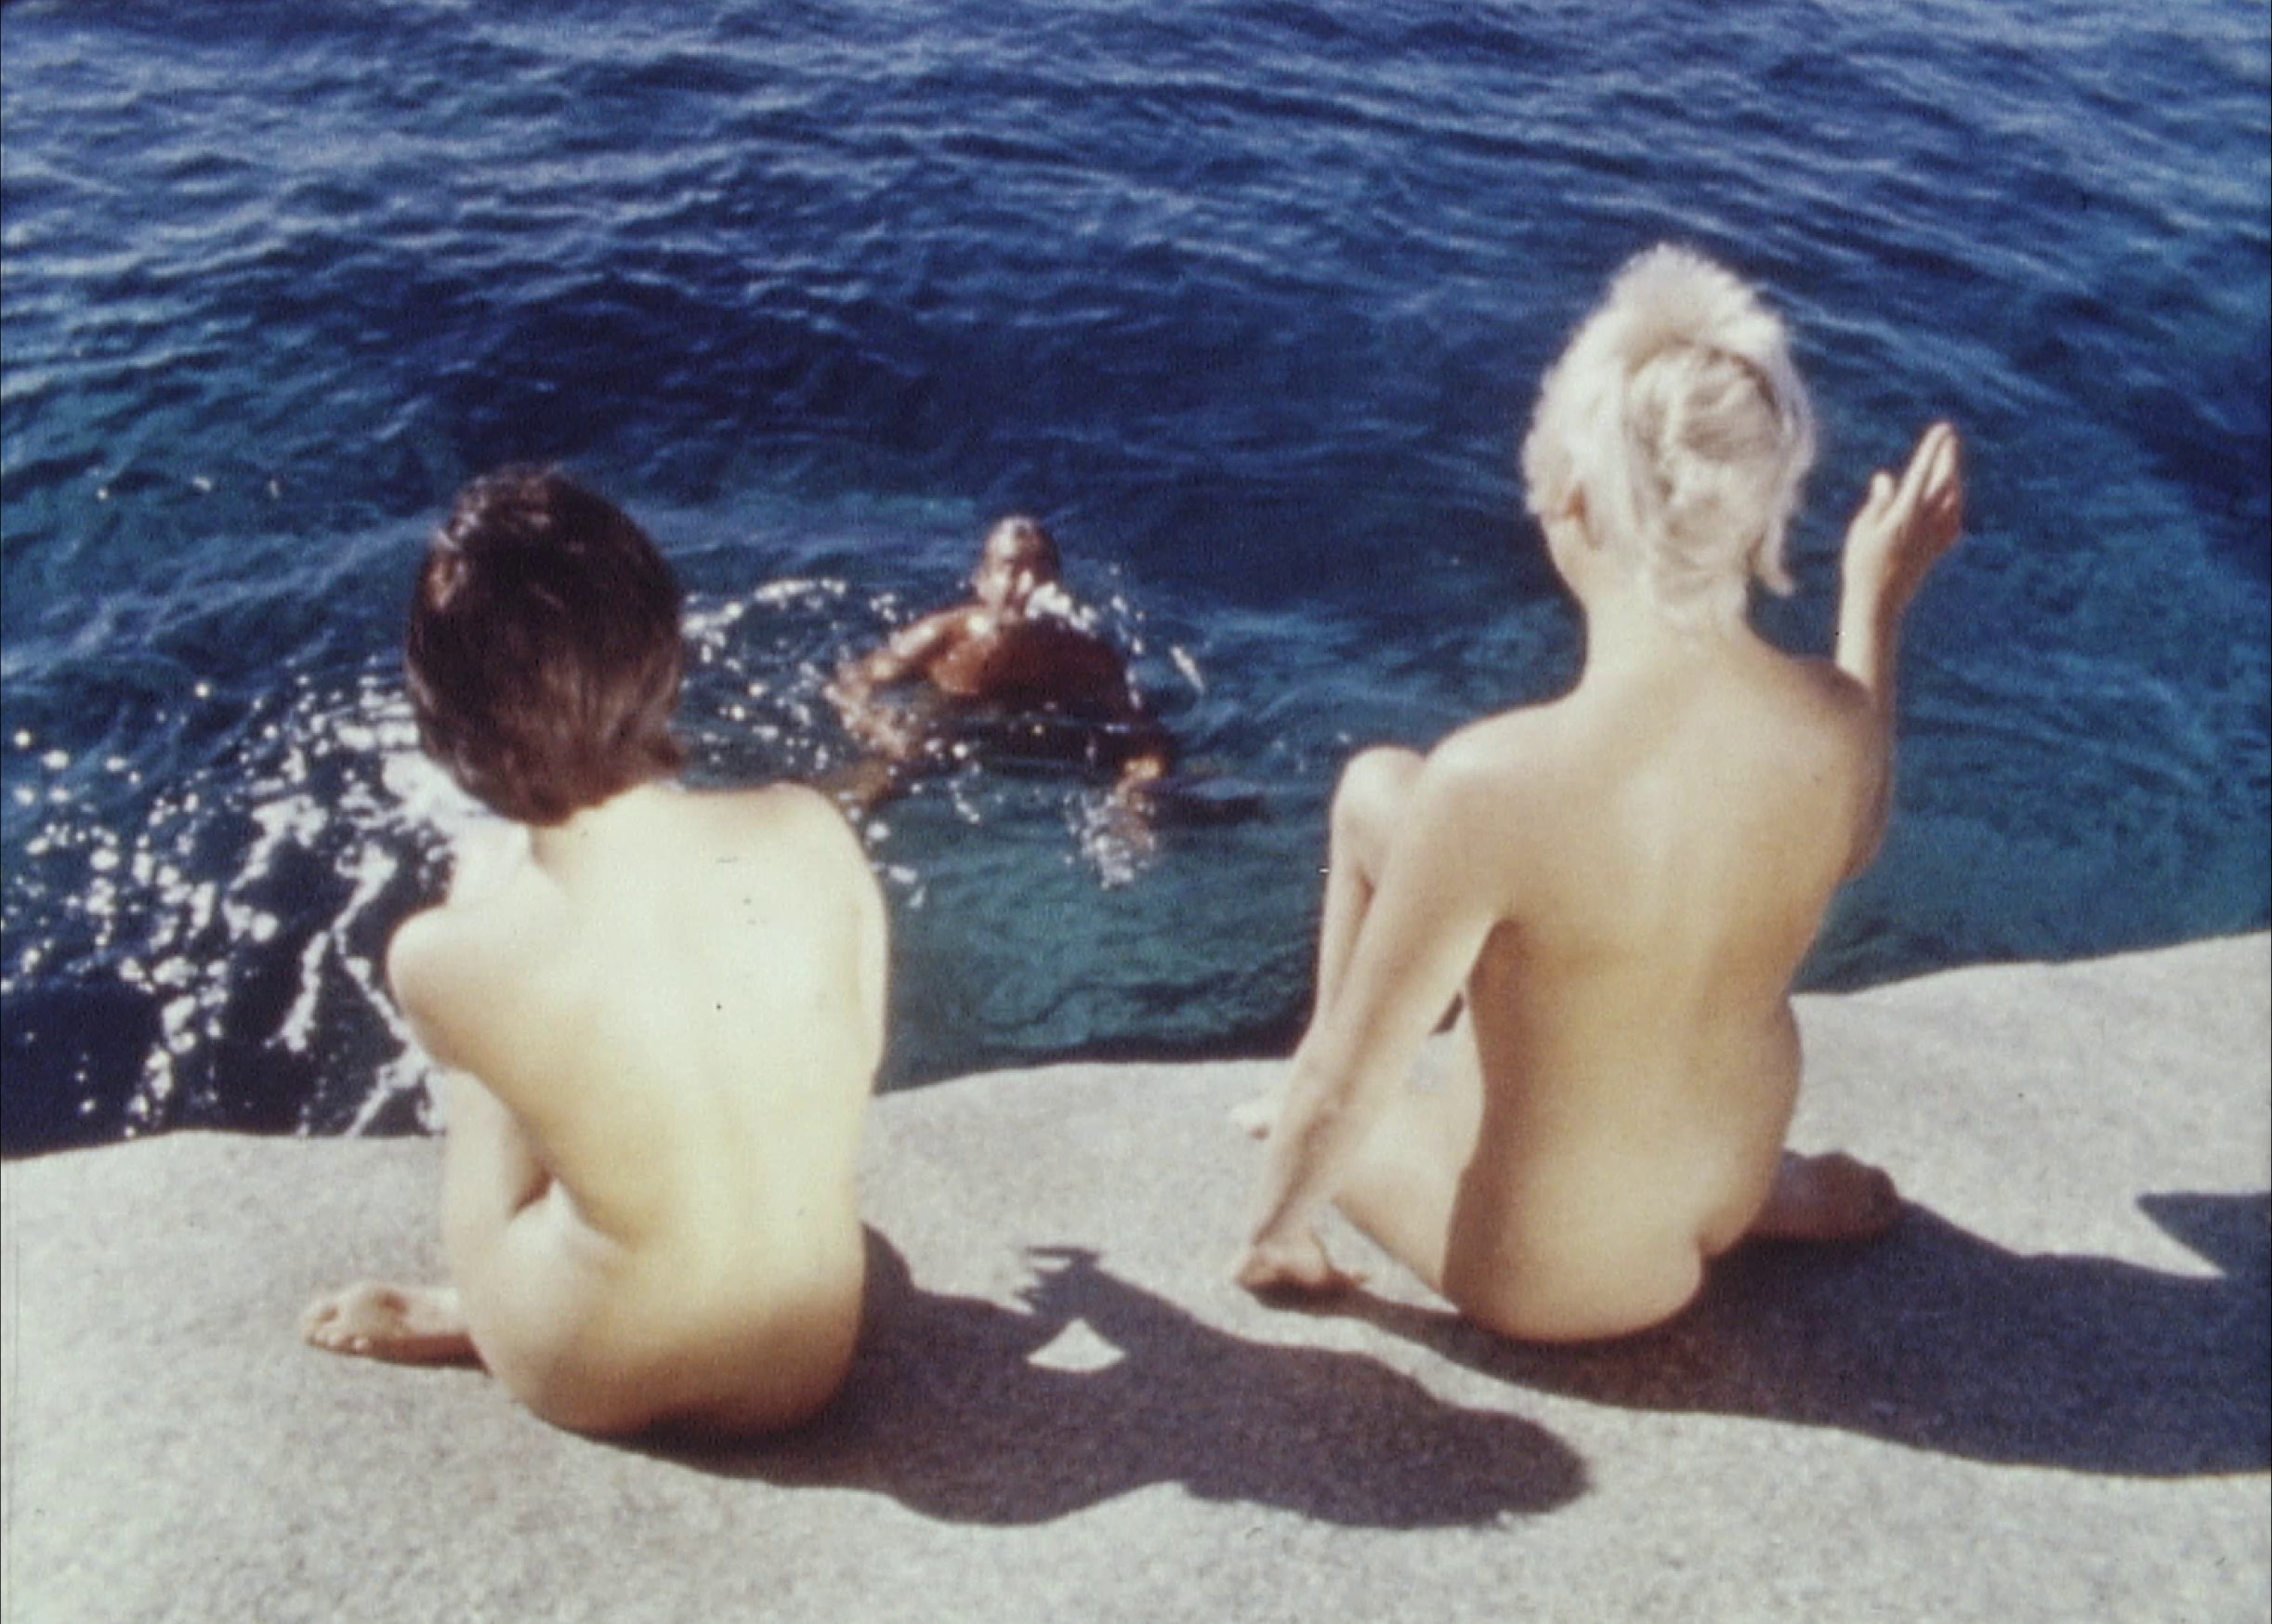 Sun-drenched nudist films from the 50s and picture